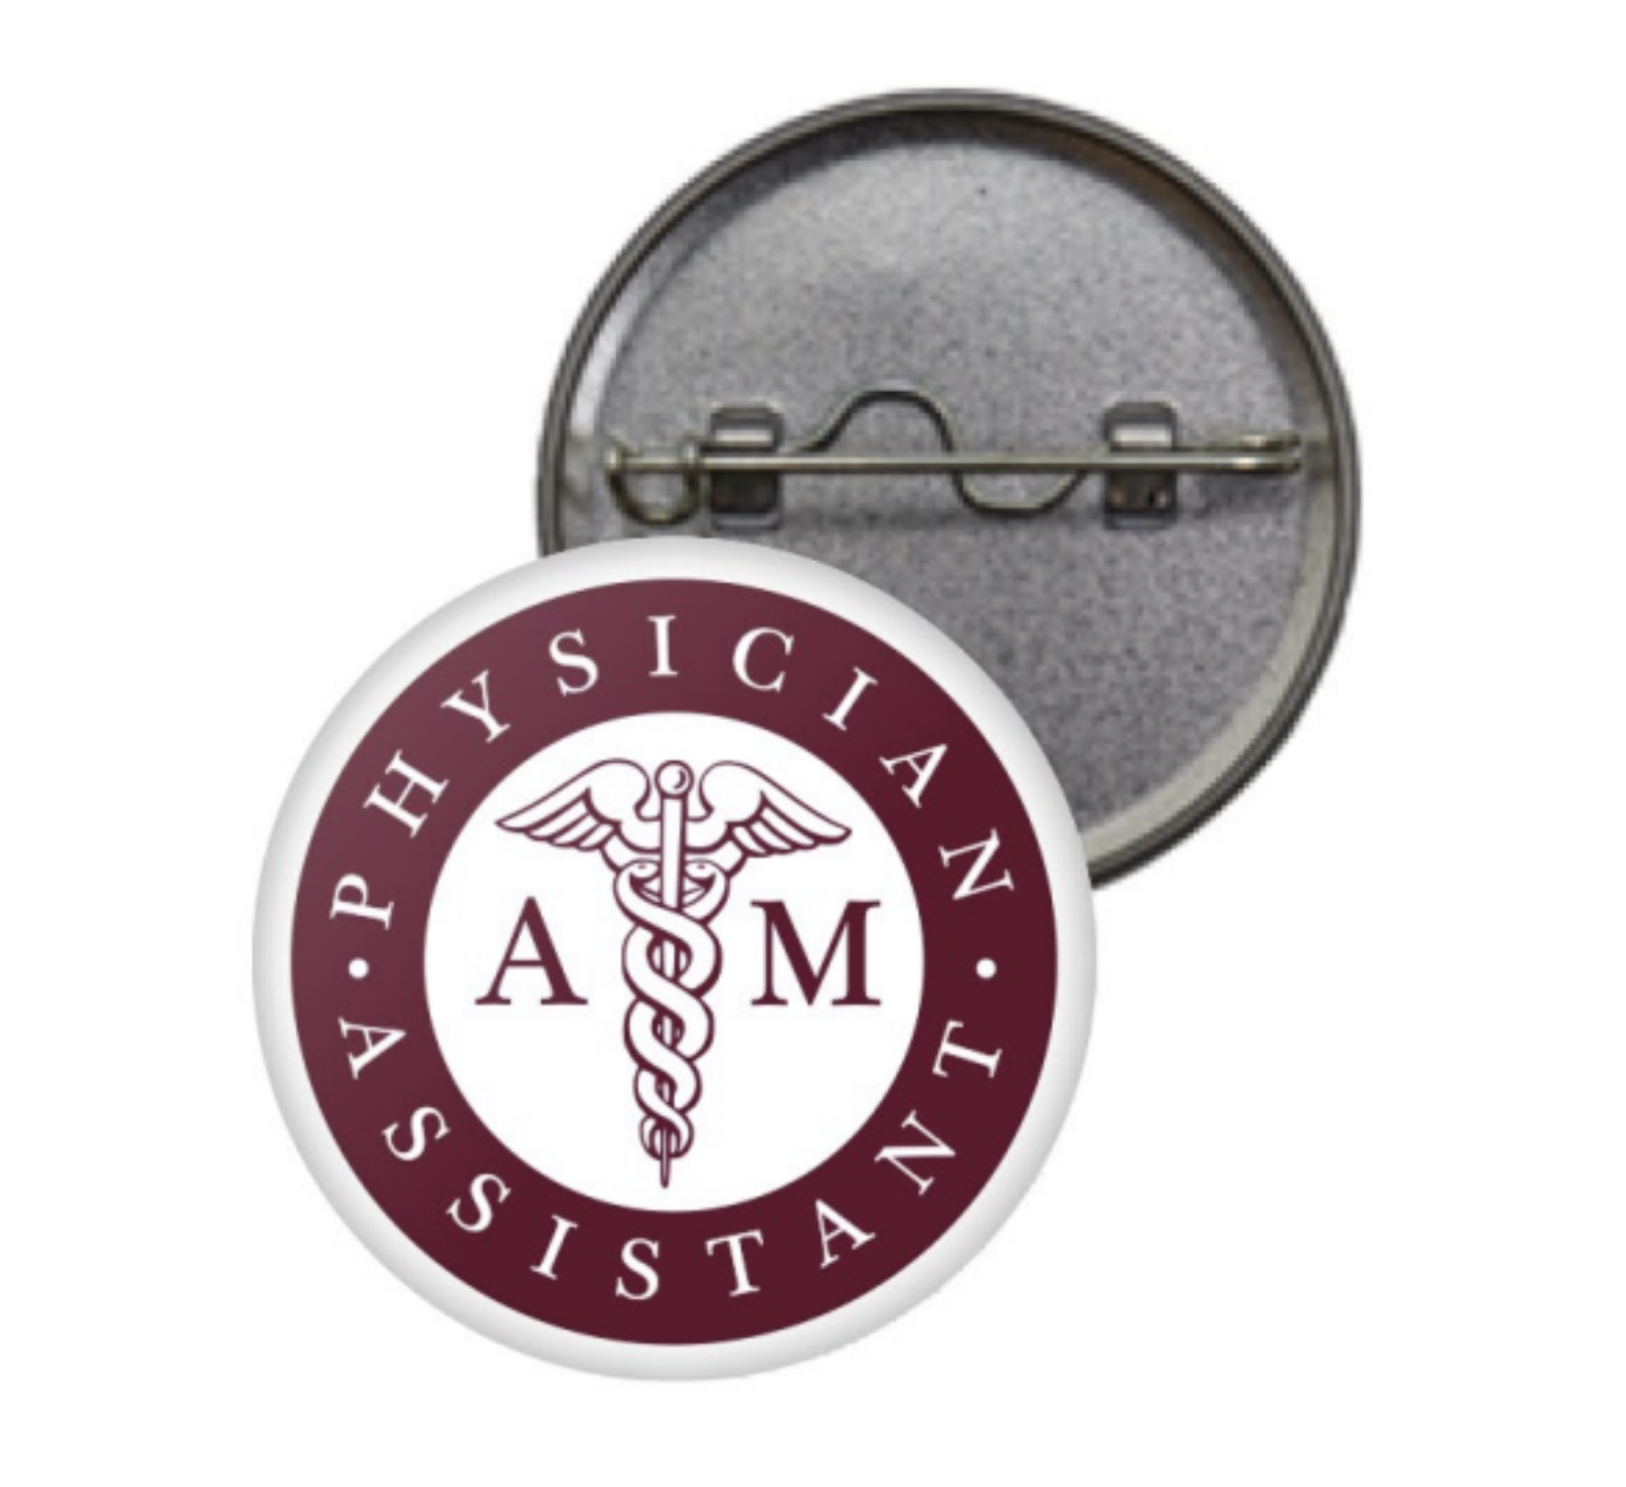 NEW FAPA Buttons